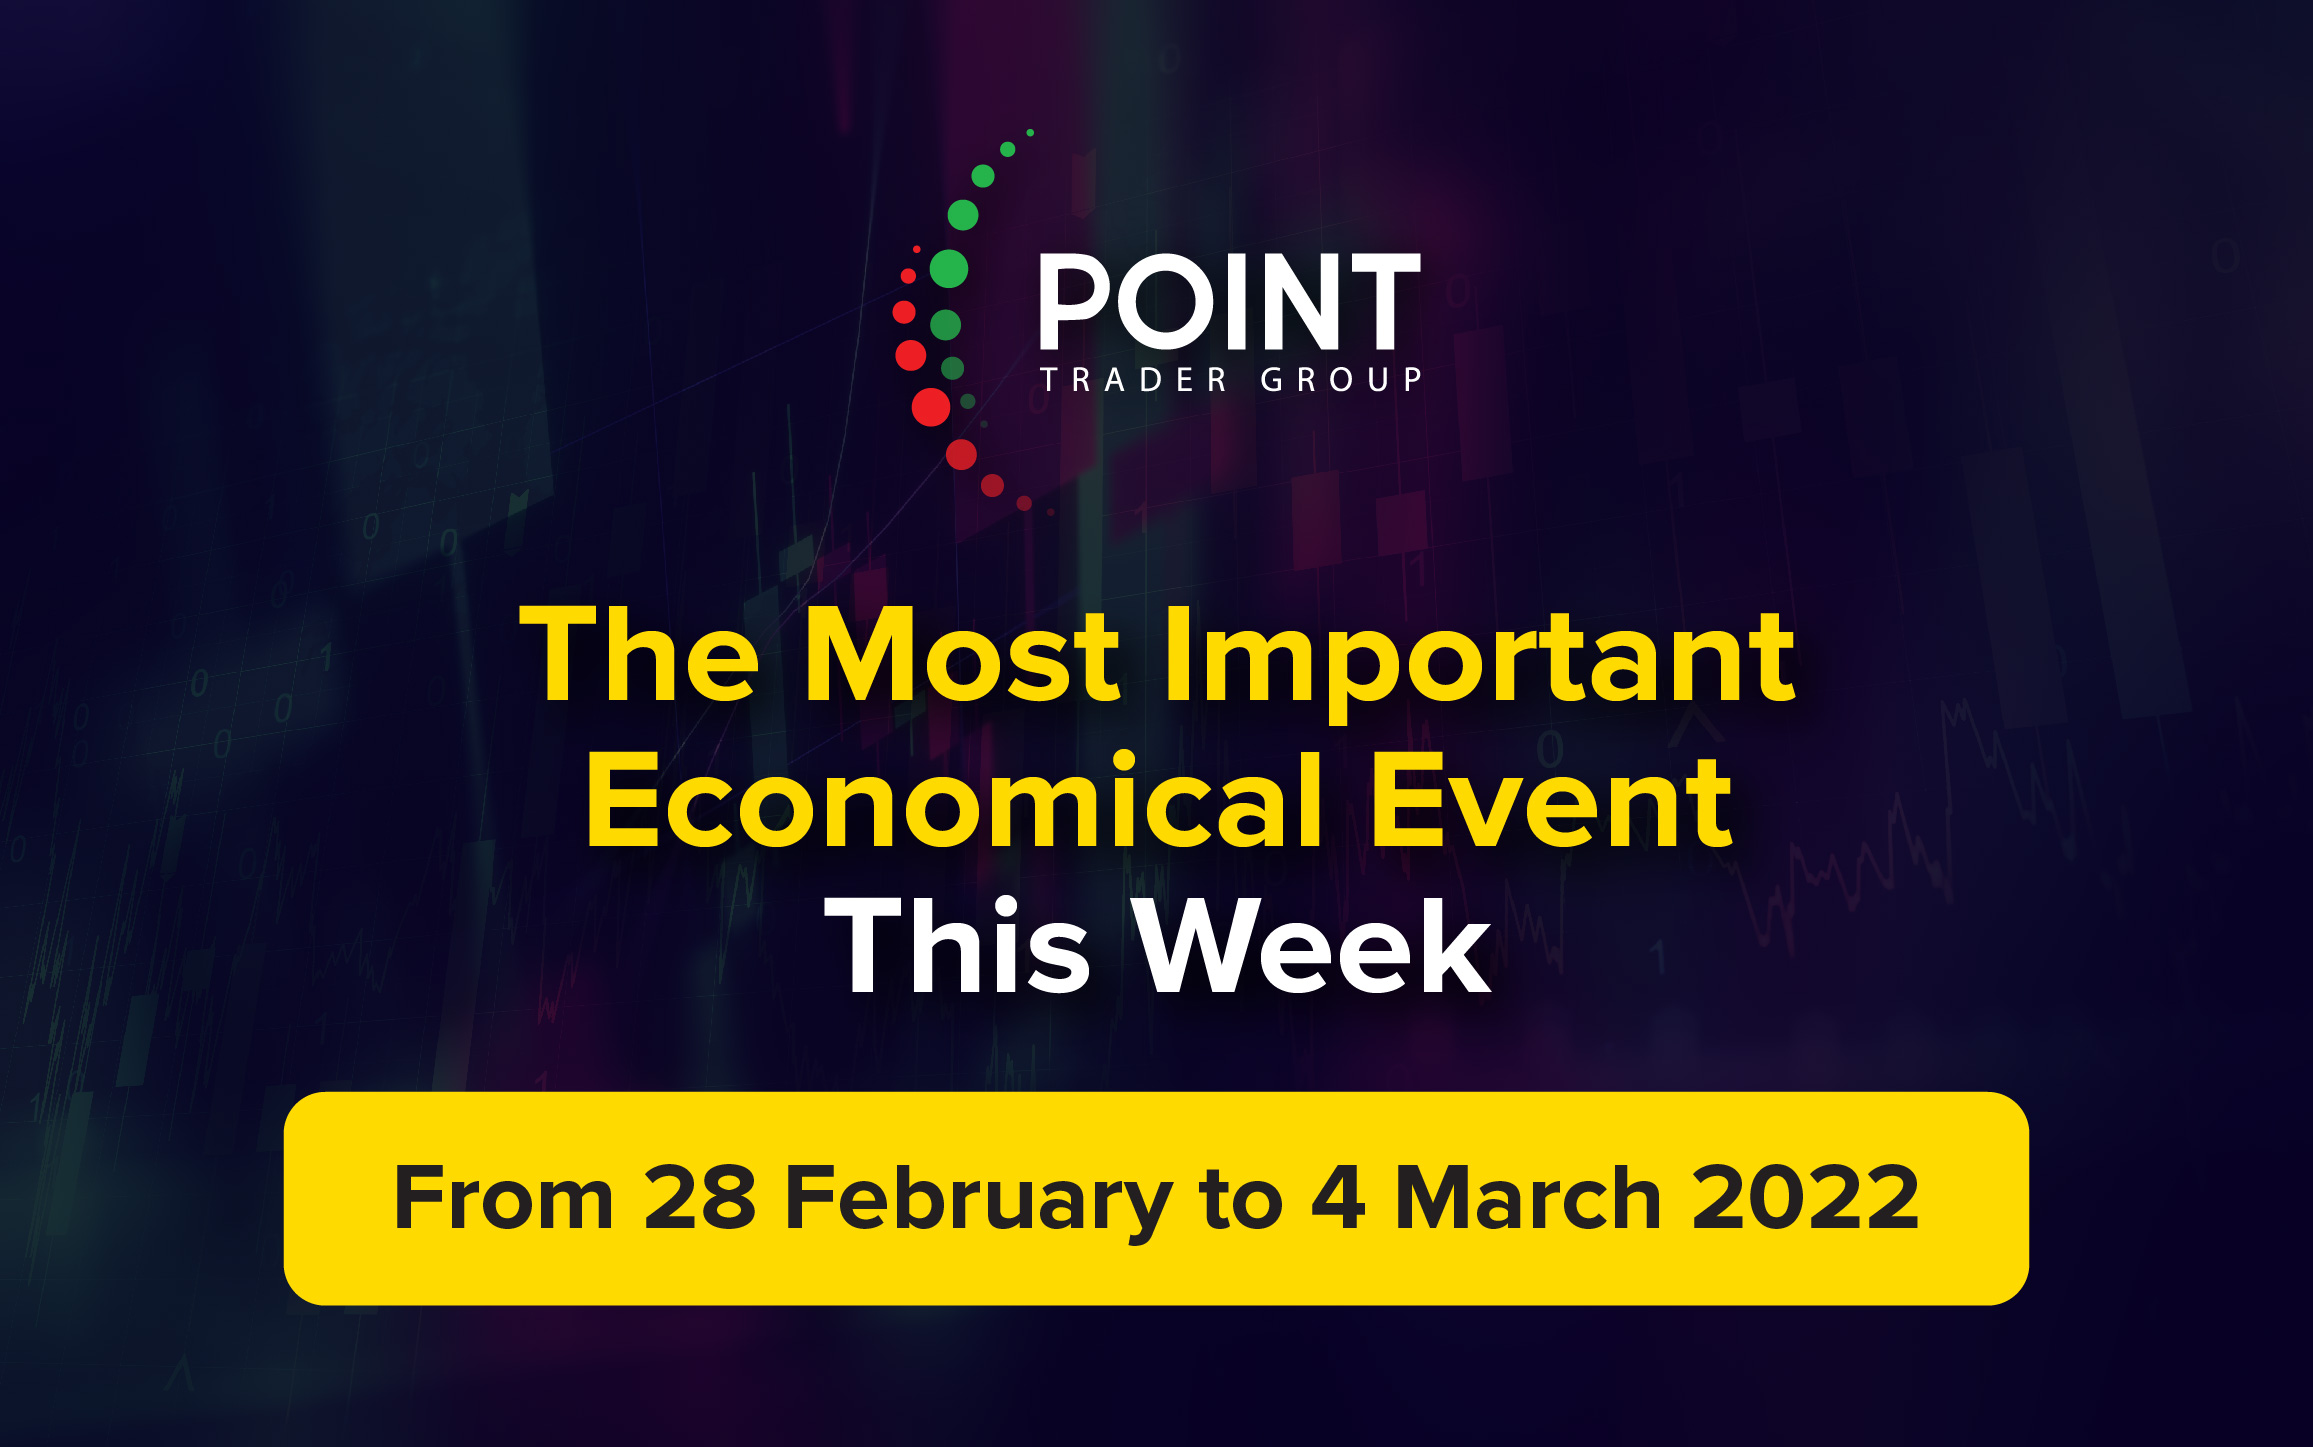 The most important Economic events this week from the 28th to the 1st of Mar 2022